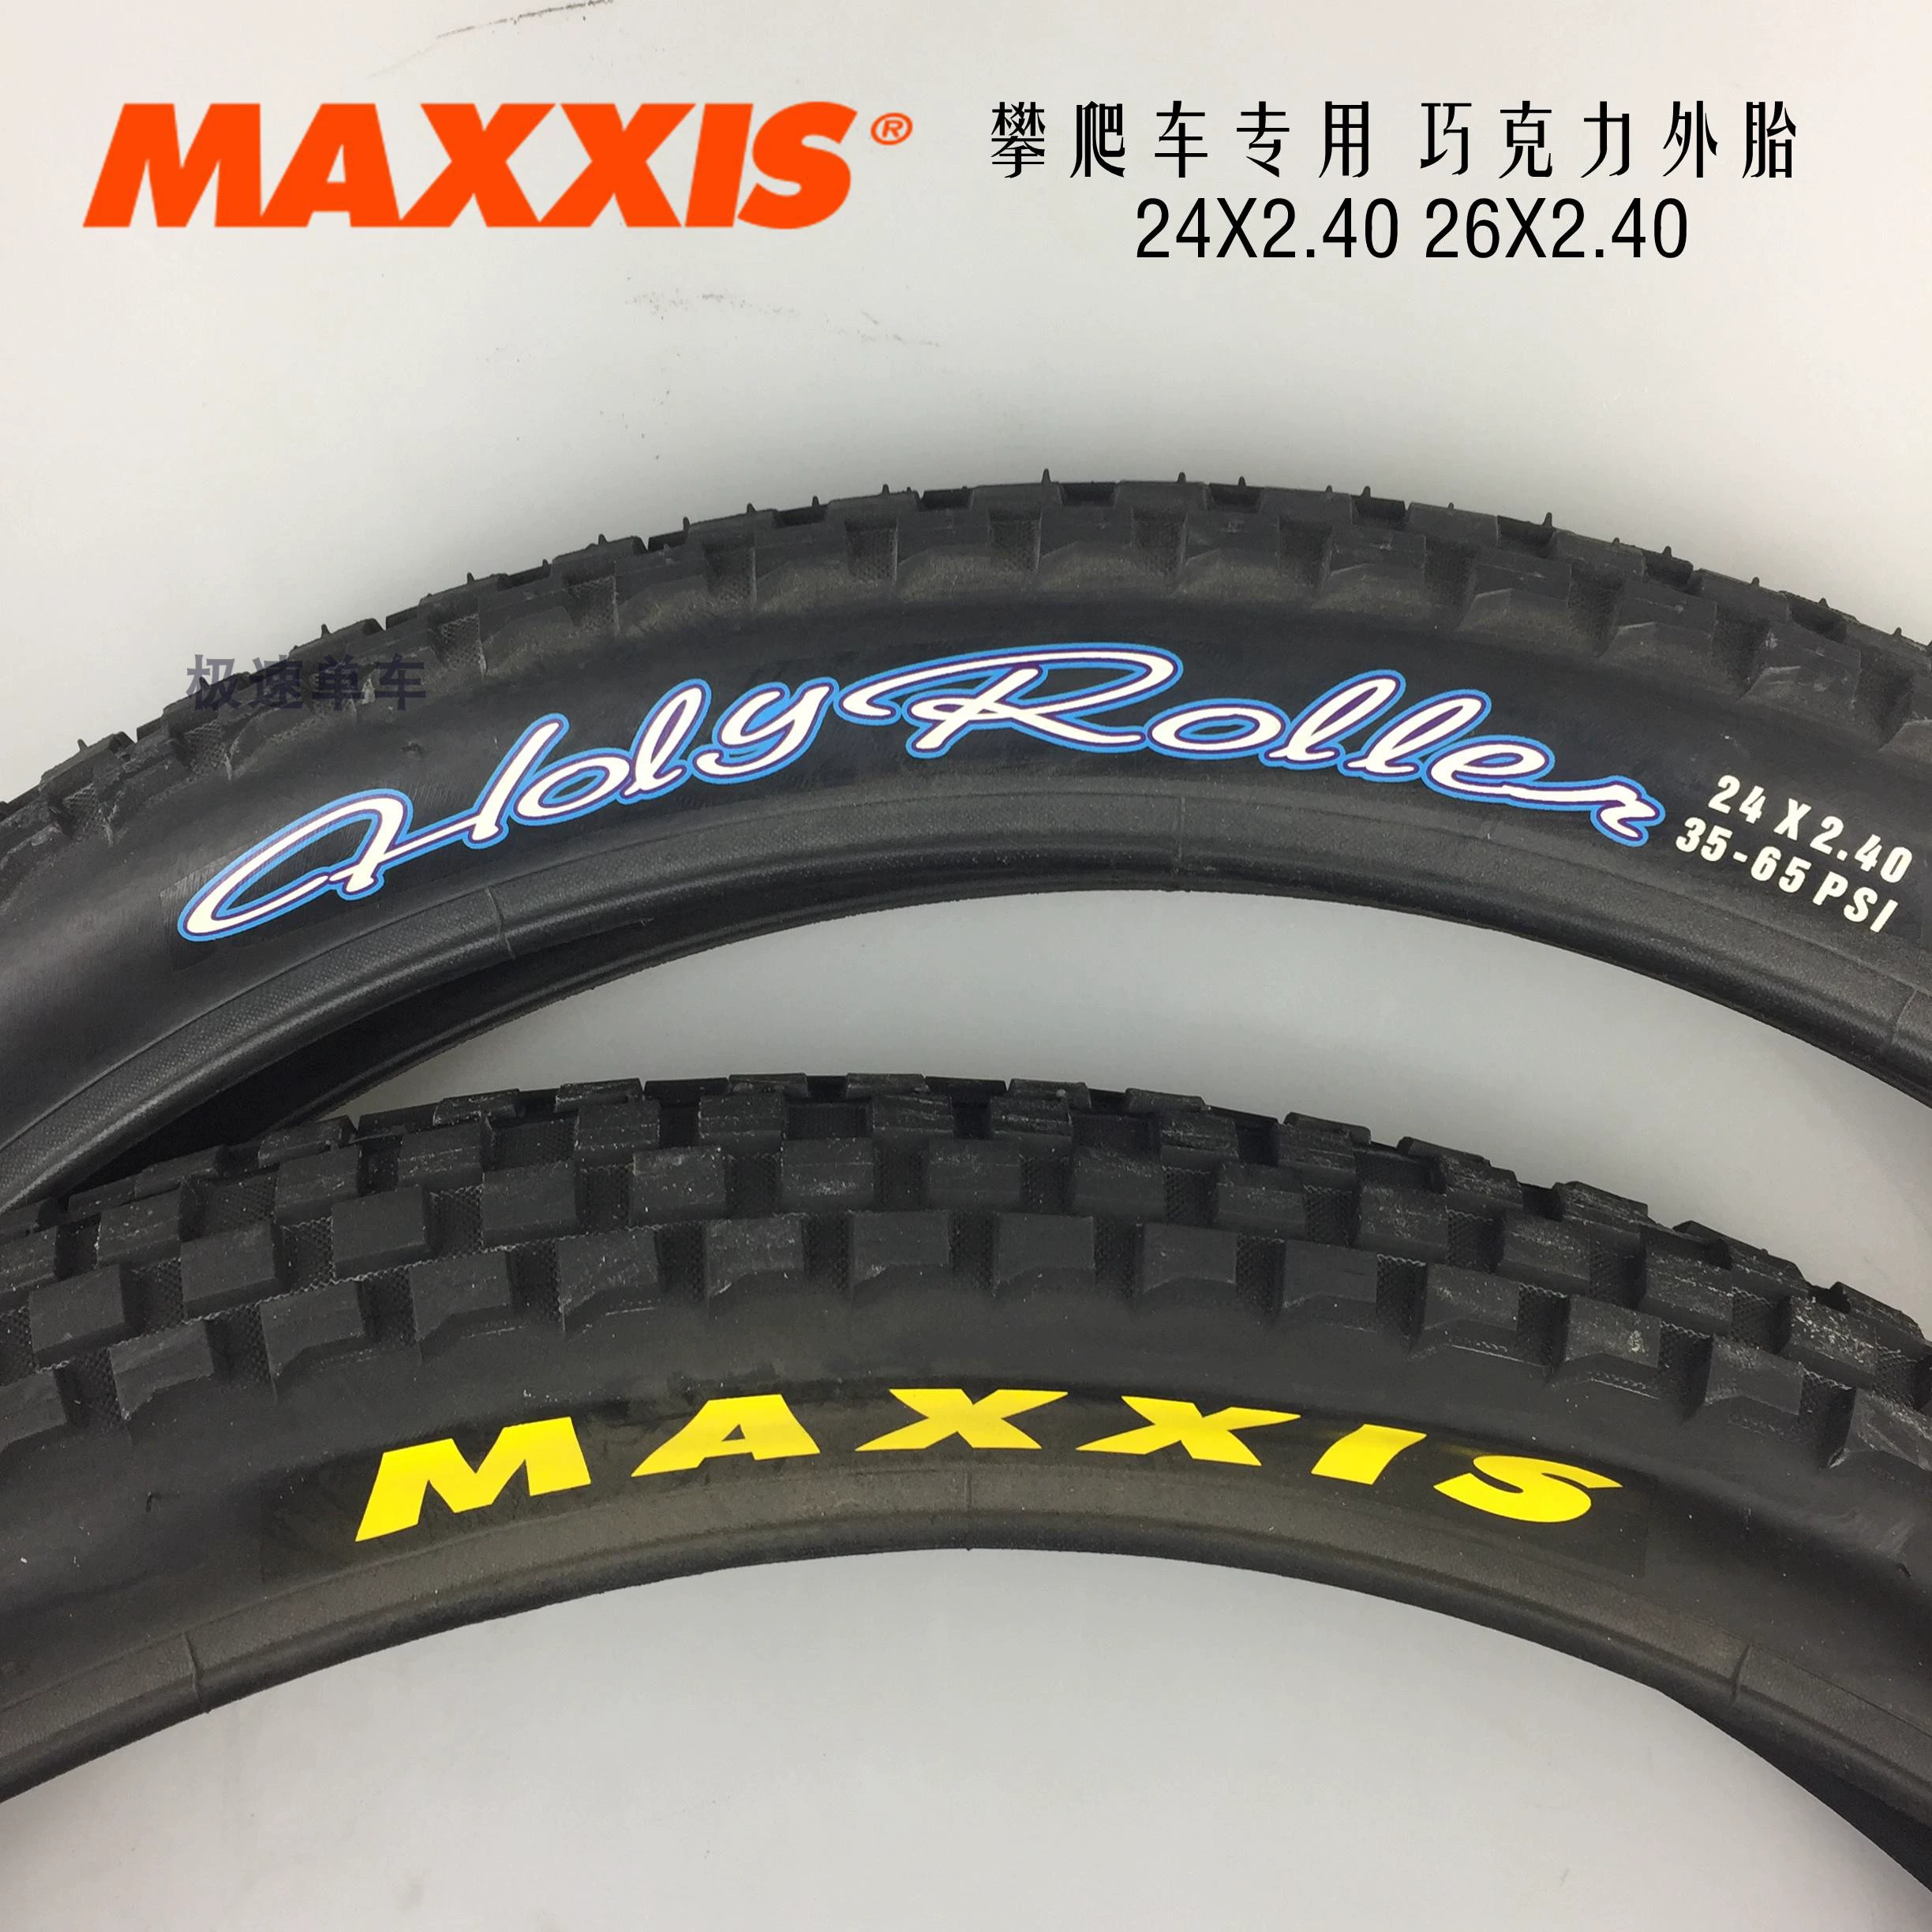 maxxis 26 inch